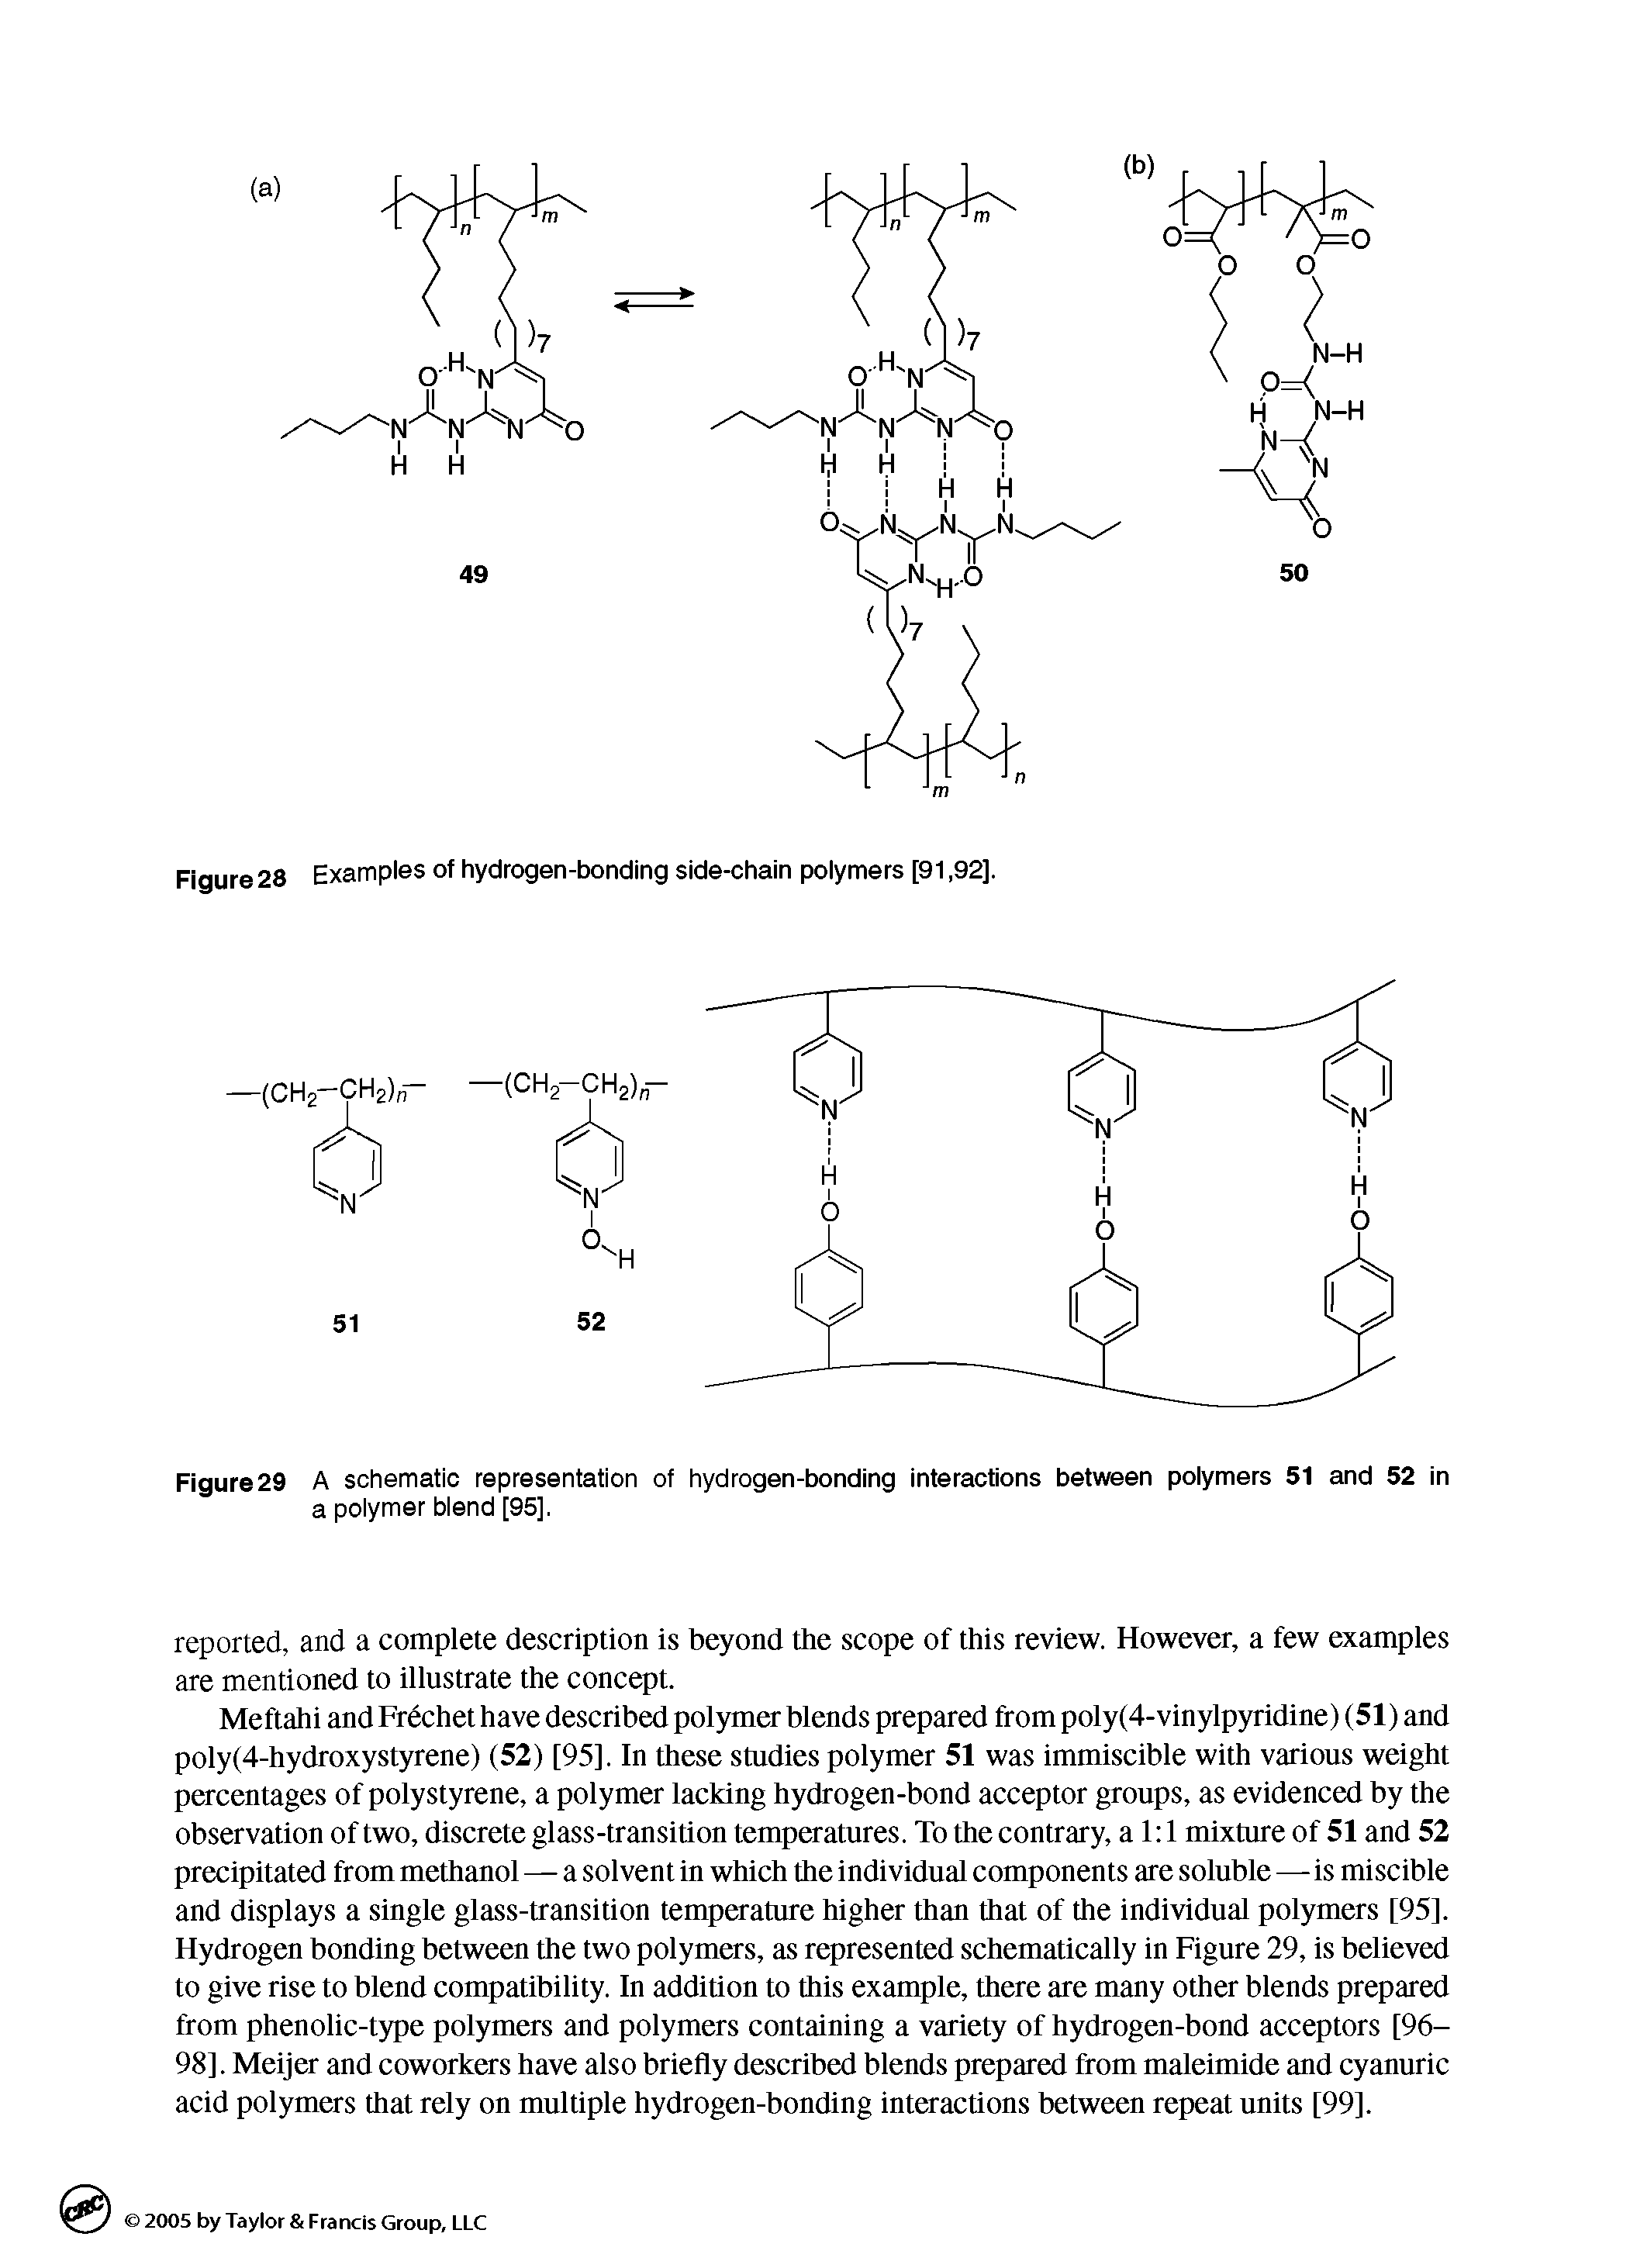 Figure 28 Examples of hydrogen-bonding side-chain polymers [91,92],...